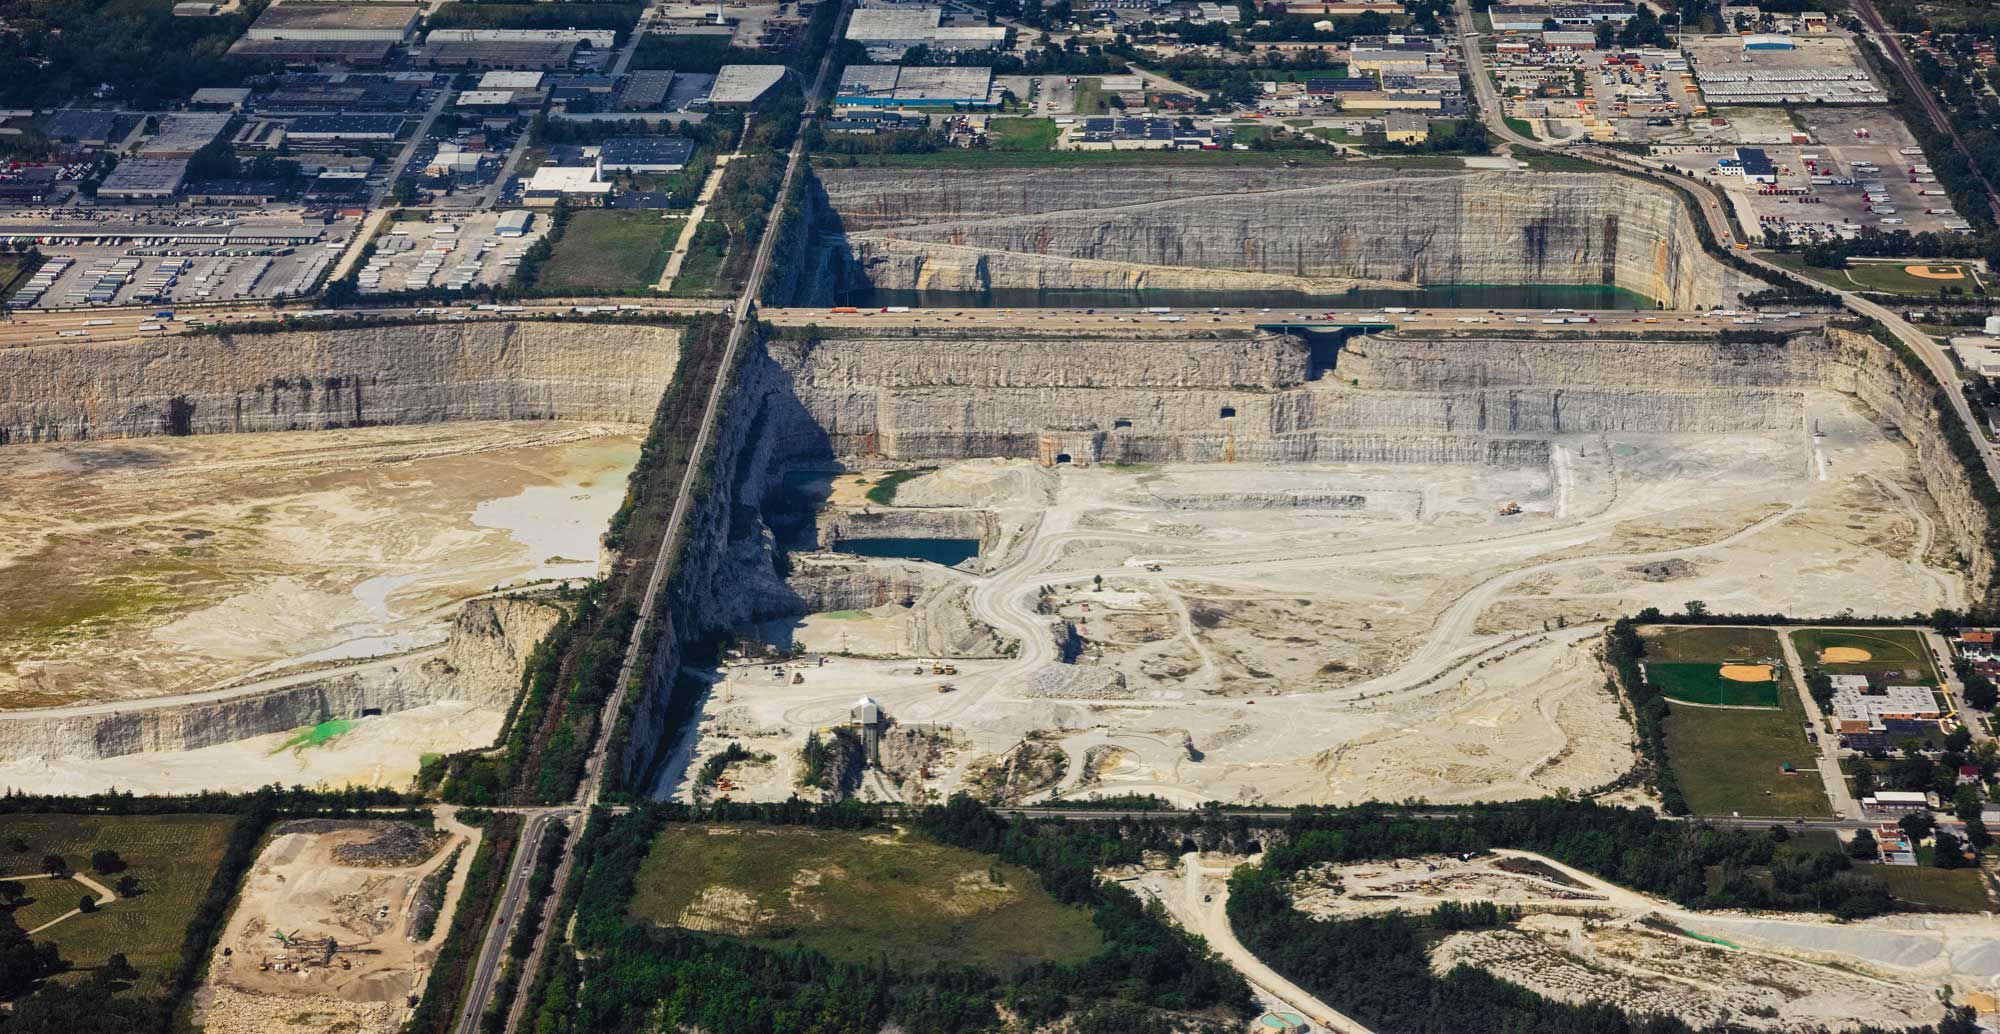 Aerial photograph of Thornton Quarry in northern Illinois. The photograph shows three pits of a large quarry on a flat landscape that is a patchwork of fields and developed areas with buildings and parking lots. The partitions between the quarry pits have roads running on them. The quarries themselves have vertical sides made up of beige rock. Roads and equipment can be seen on the floor of the most visible pit at right foreground. This quarry produces aggregates.